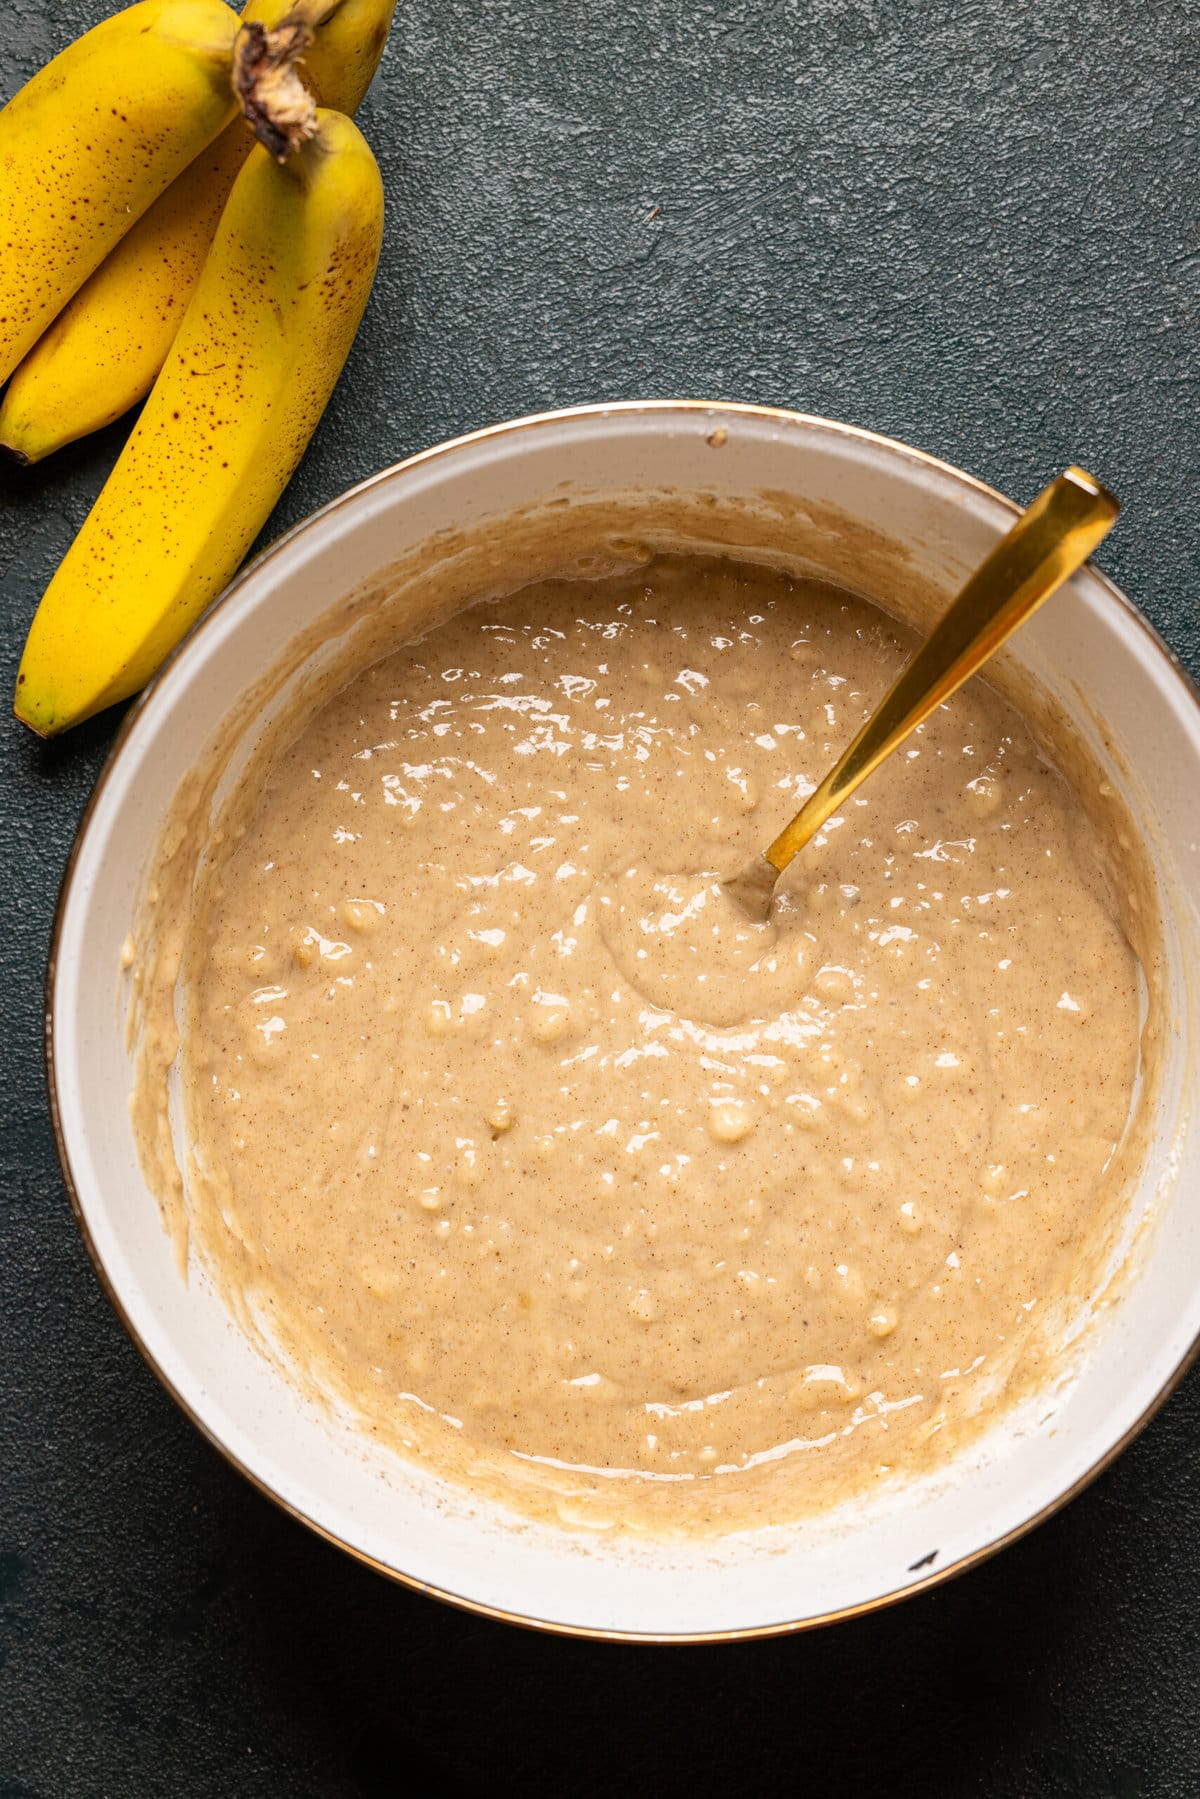 Bowl of batter with a spoon and bananas.